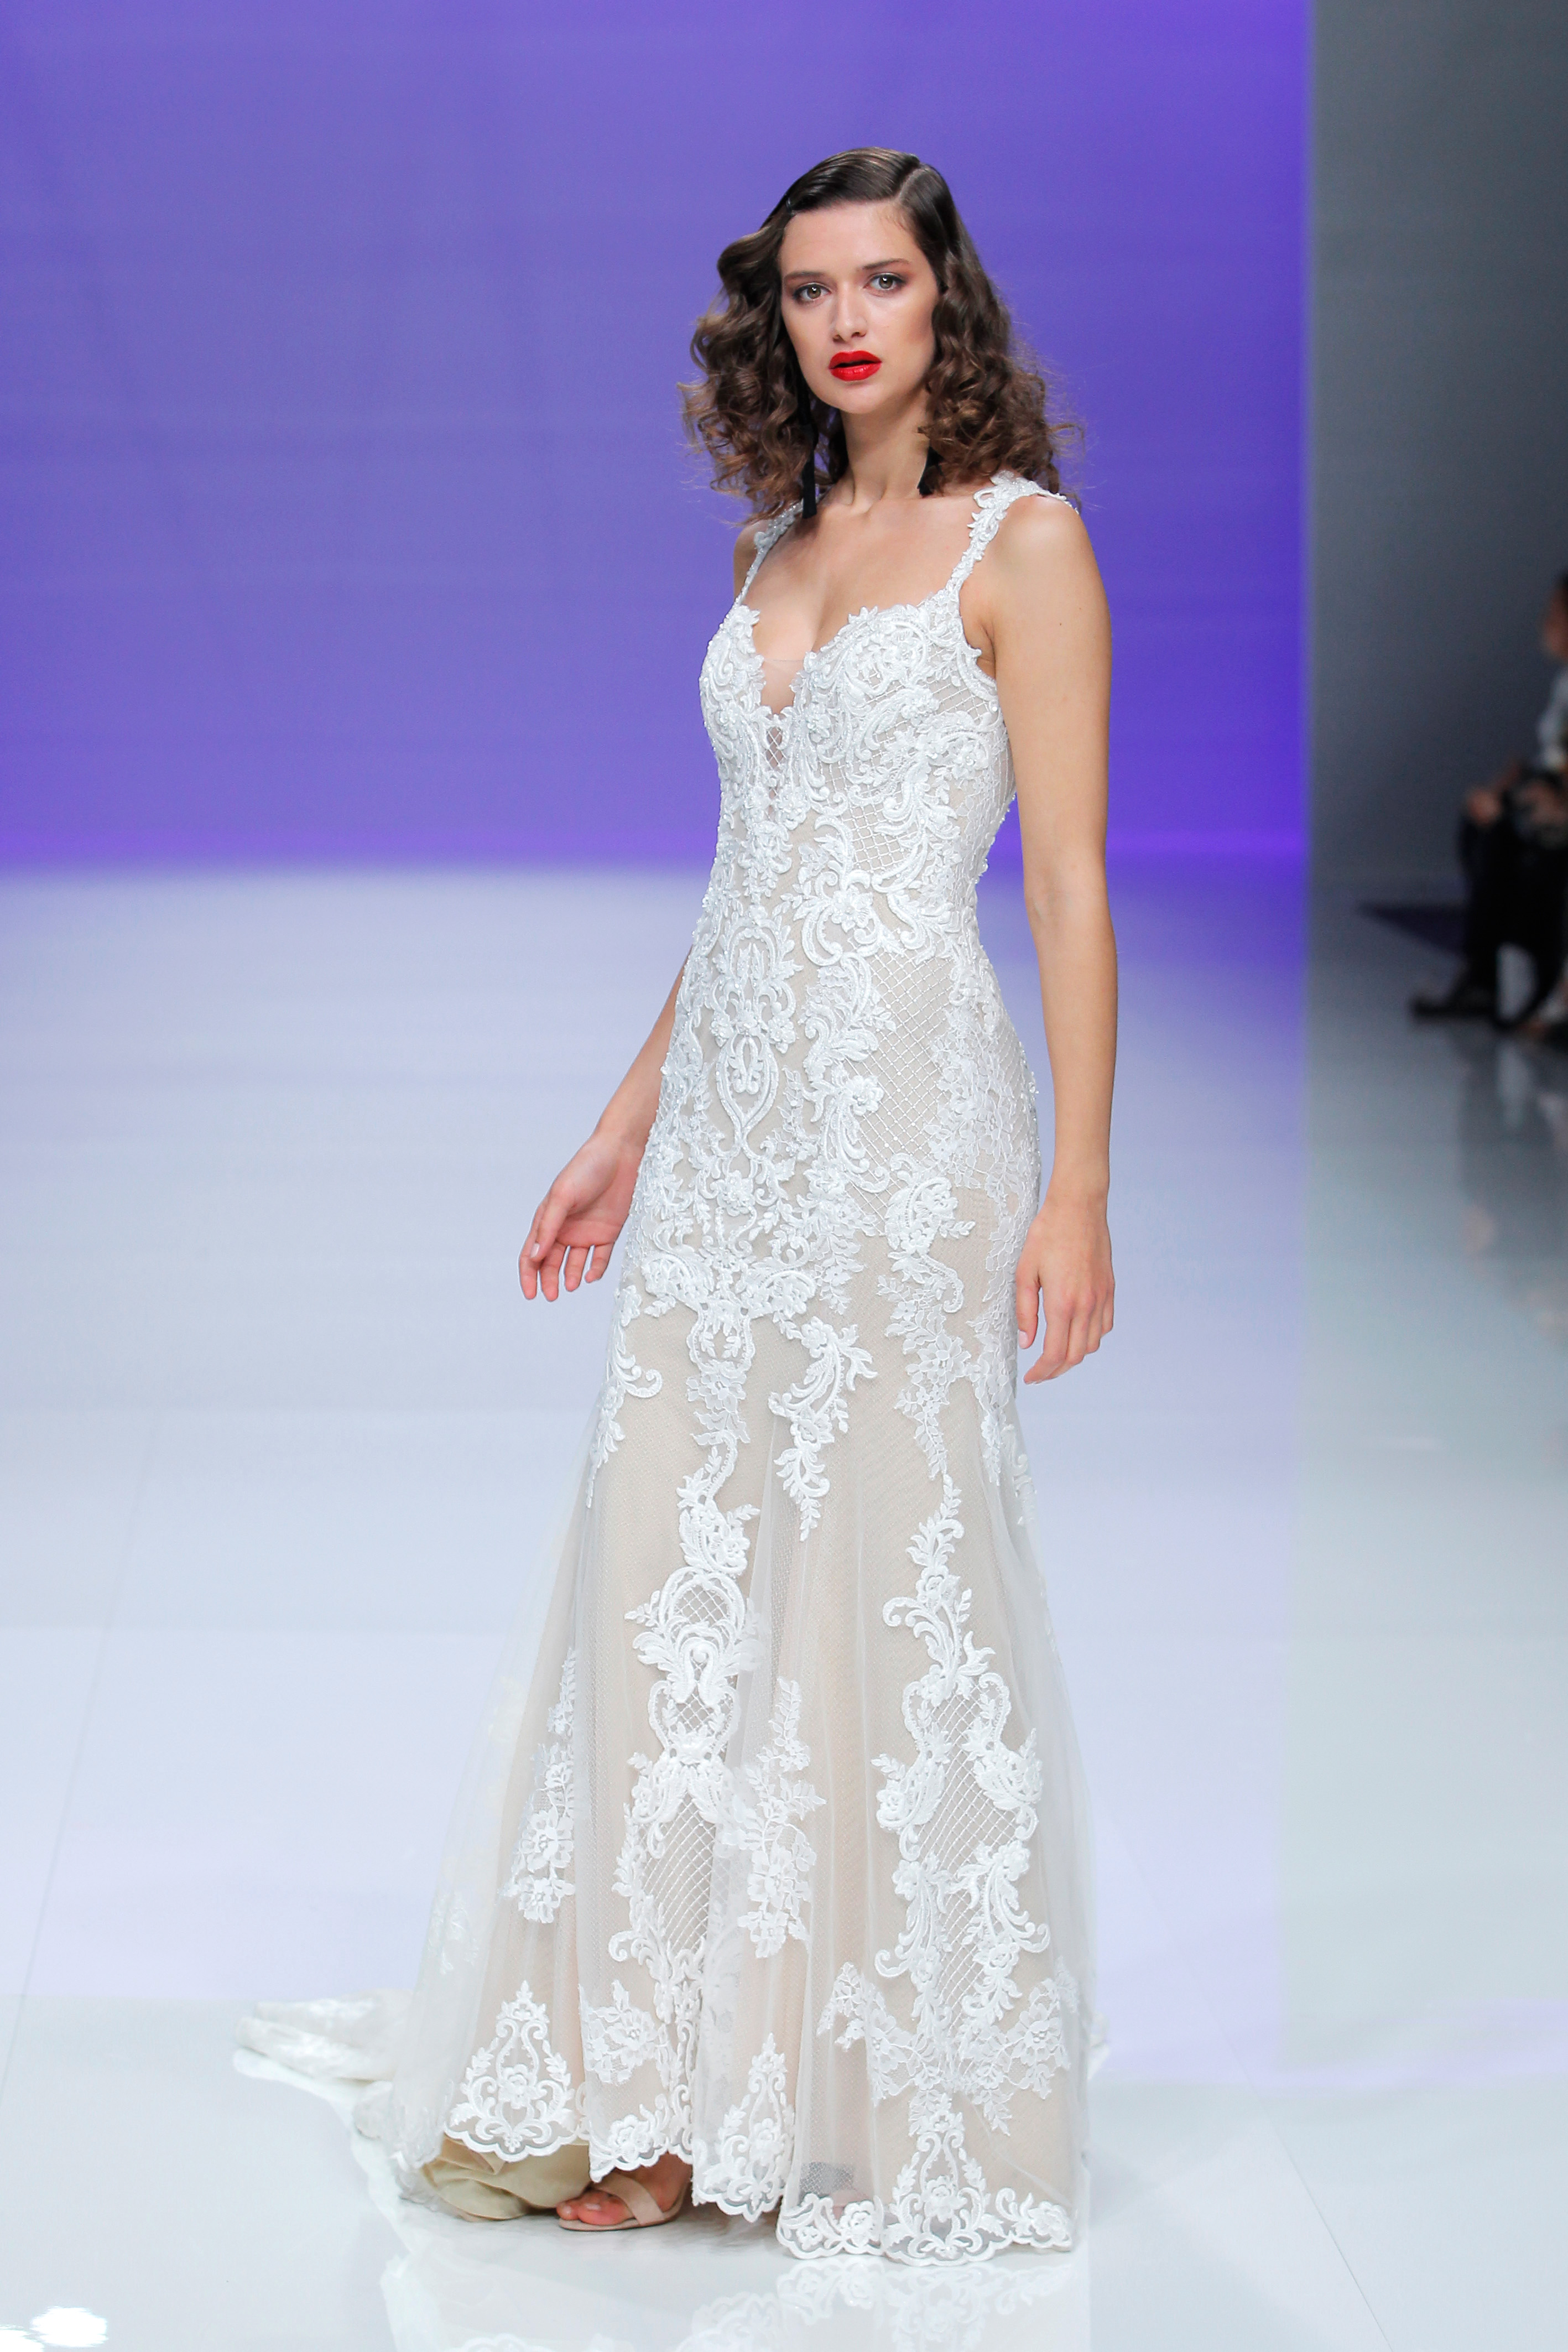 Romantic Lace Beach Wedding Dresses By Maggie Sottero